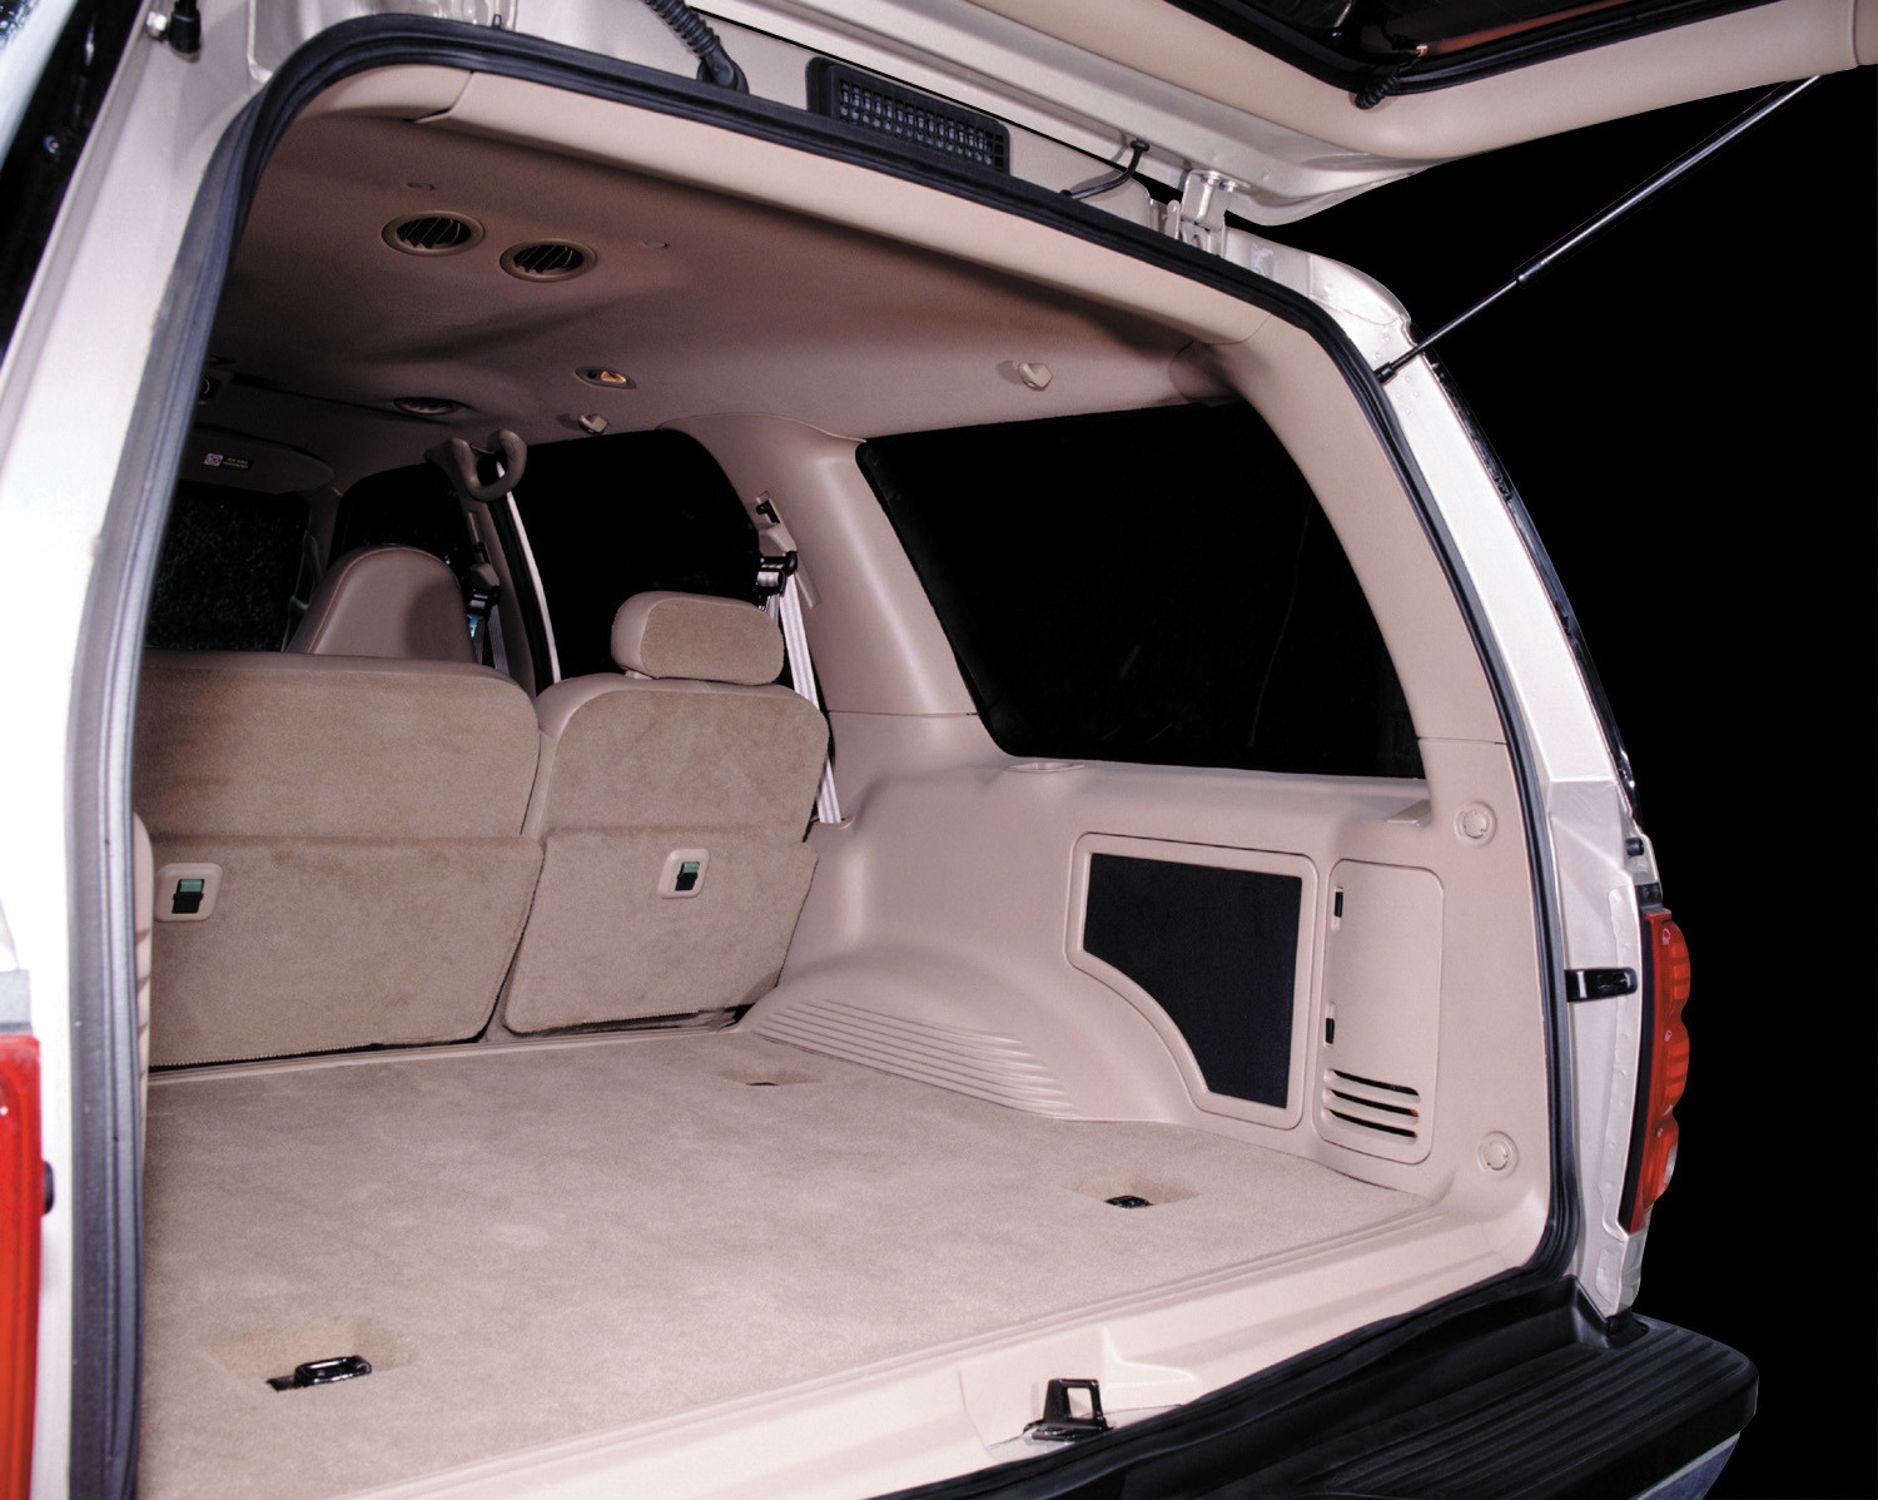 SB-F-EXPED-10W1v3 Stealthbox Installed in Vehicle